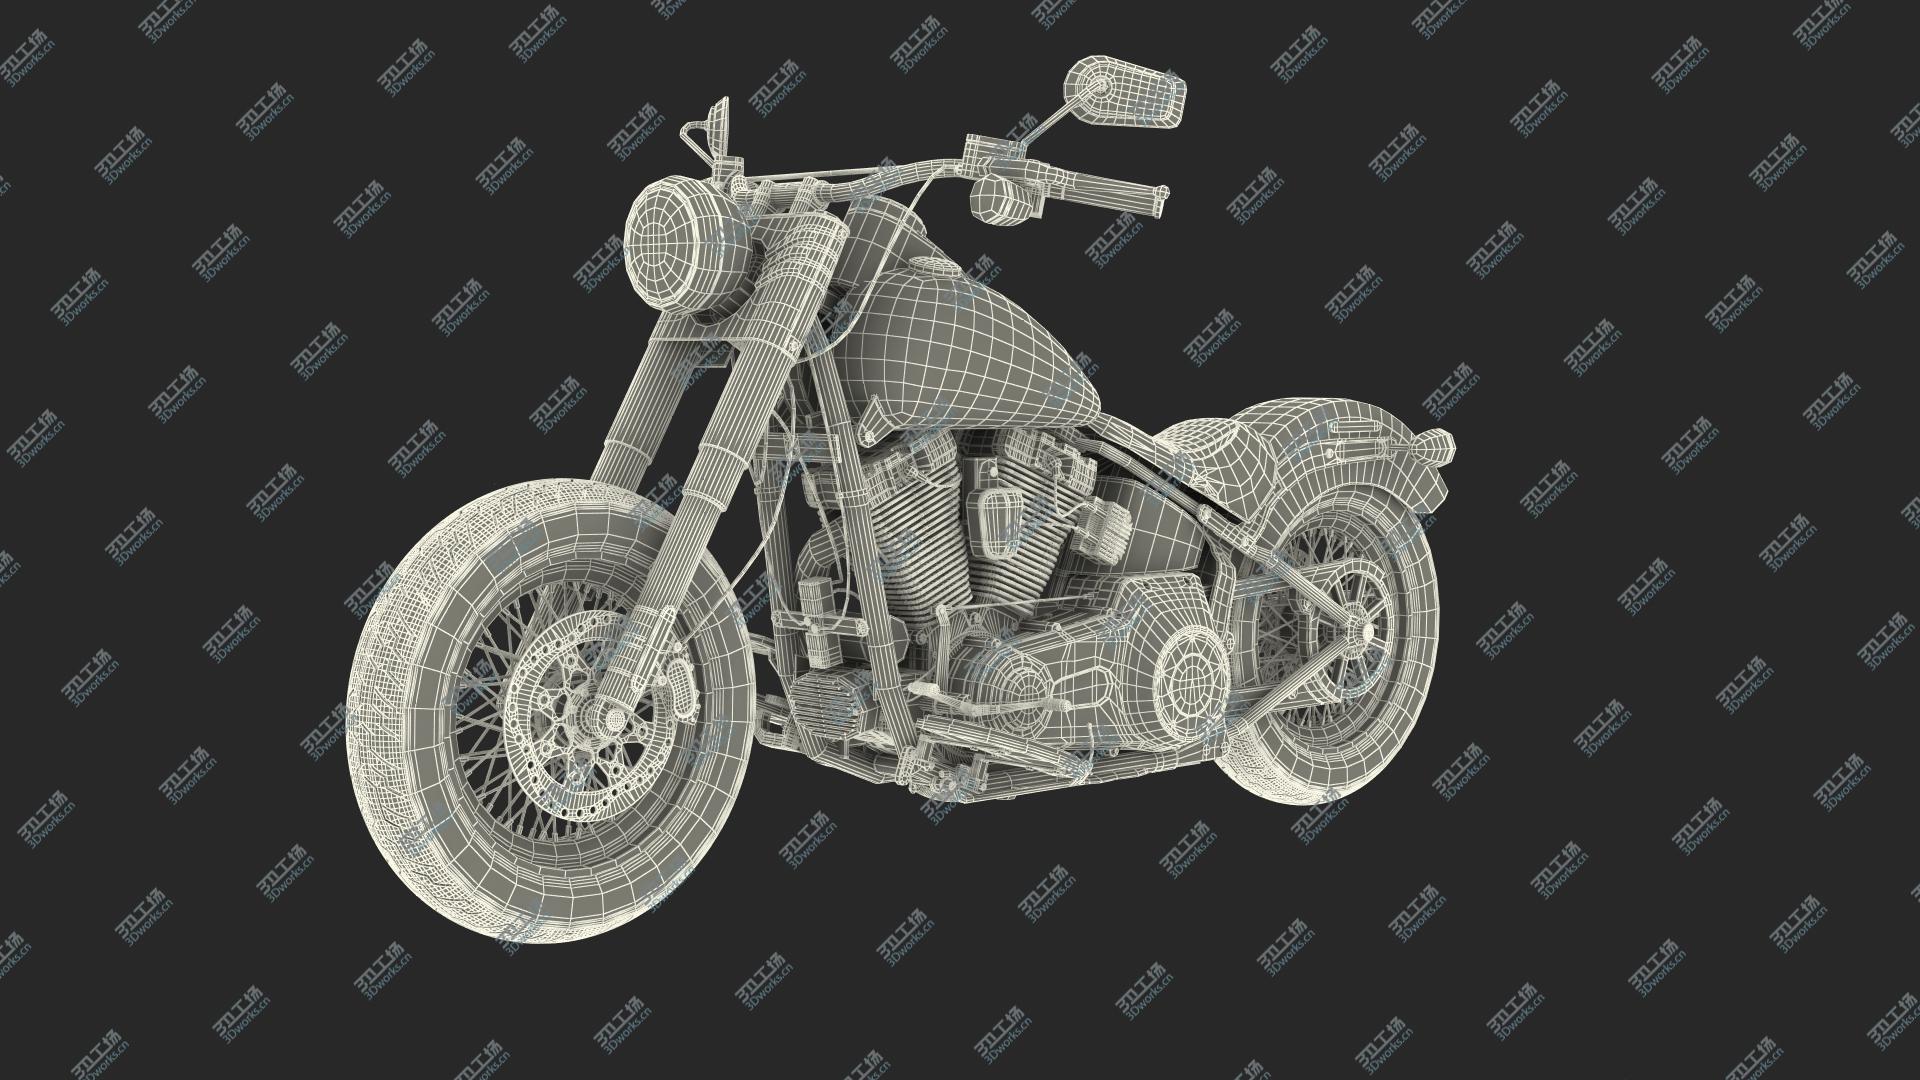 images/goods_img/202104091/Softail Motorcycle 3D model/3.jpg